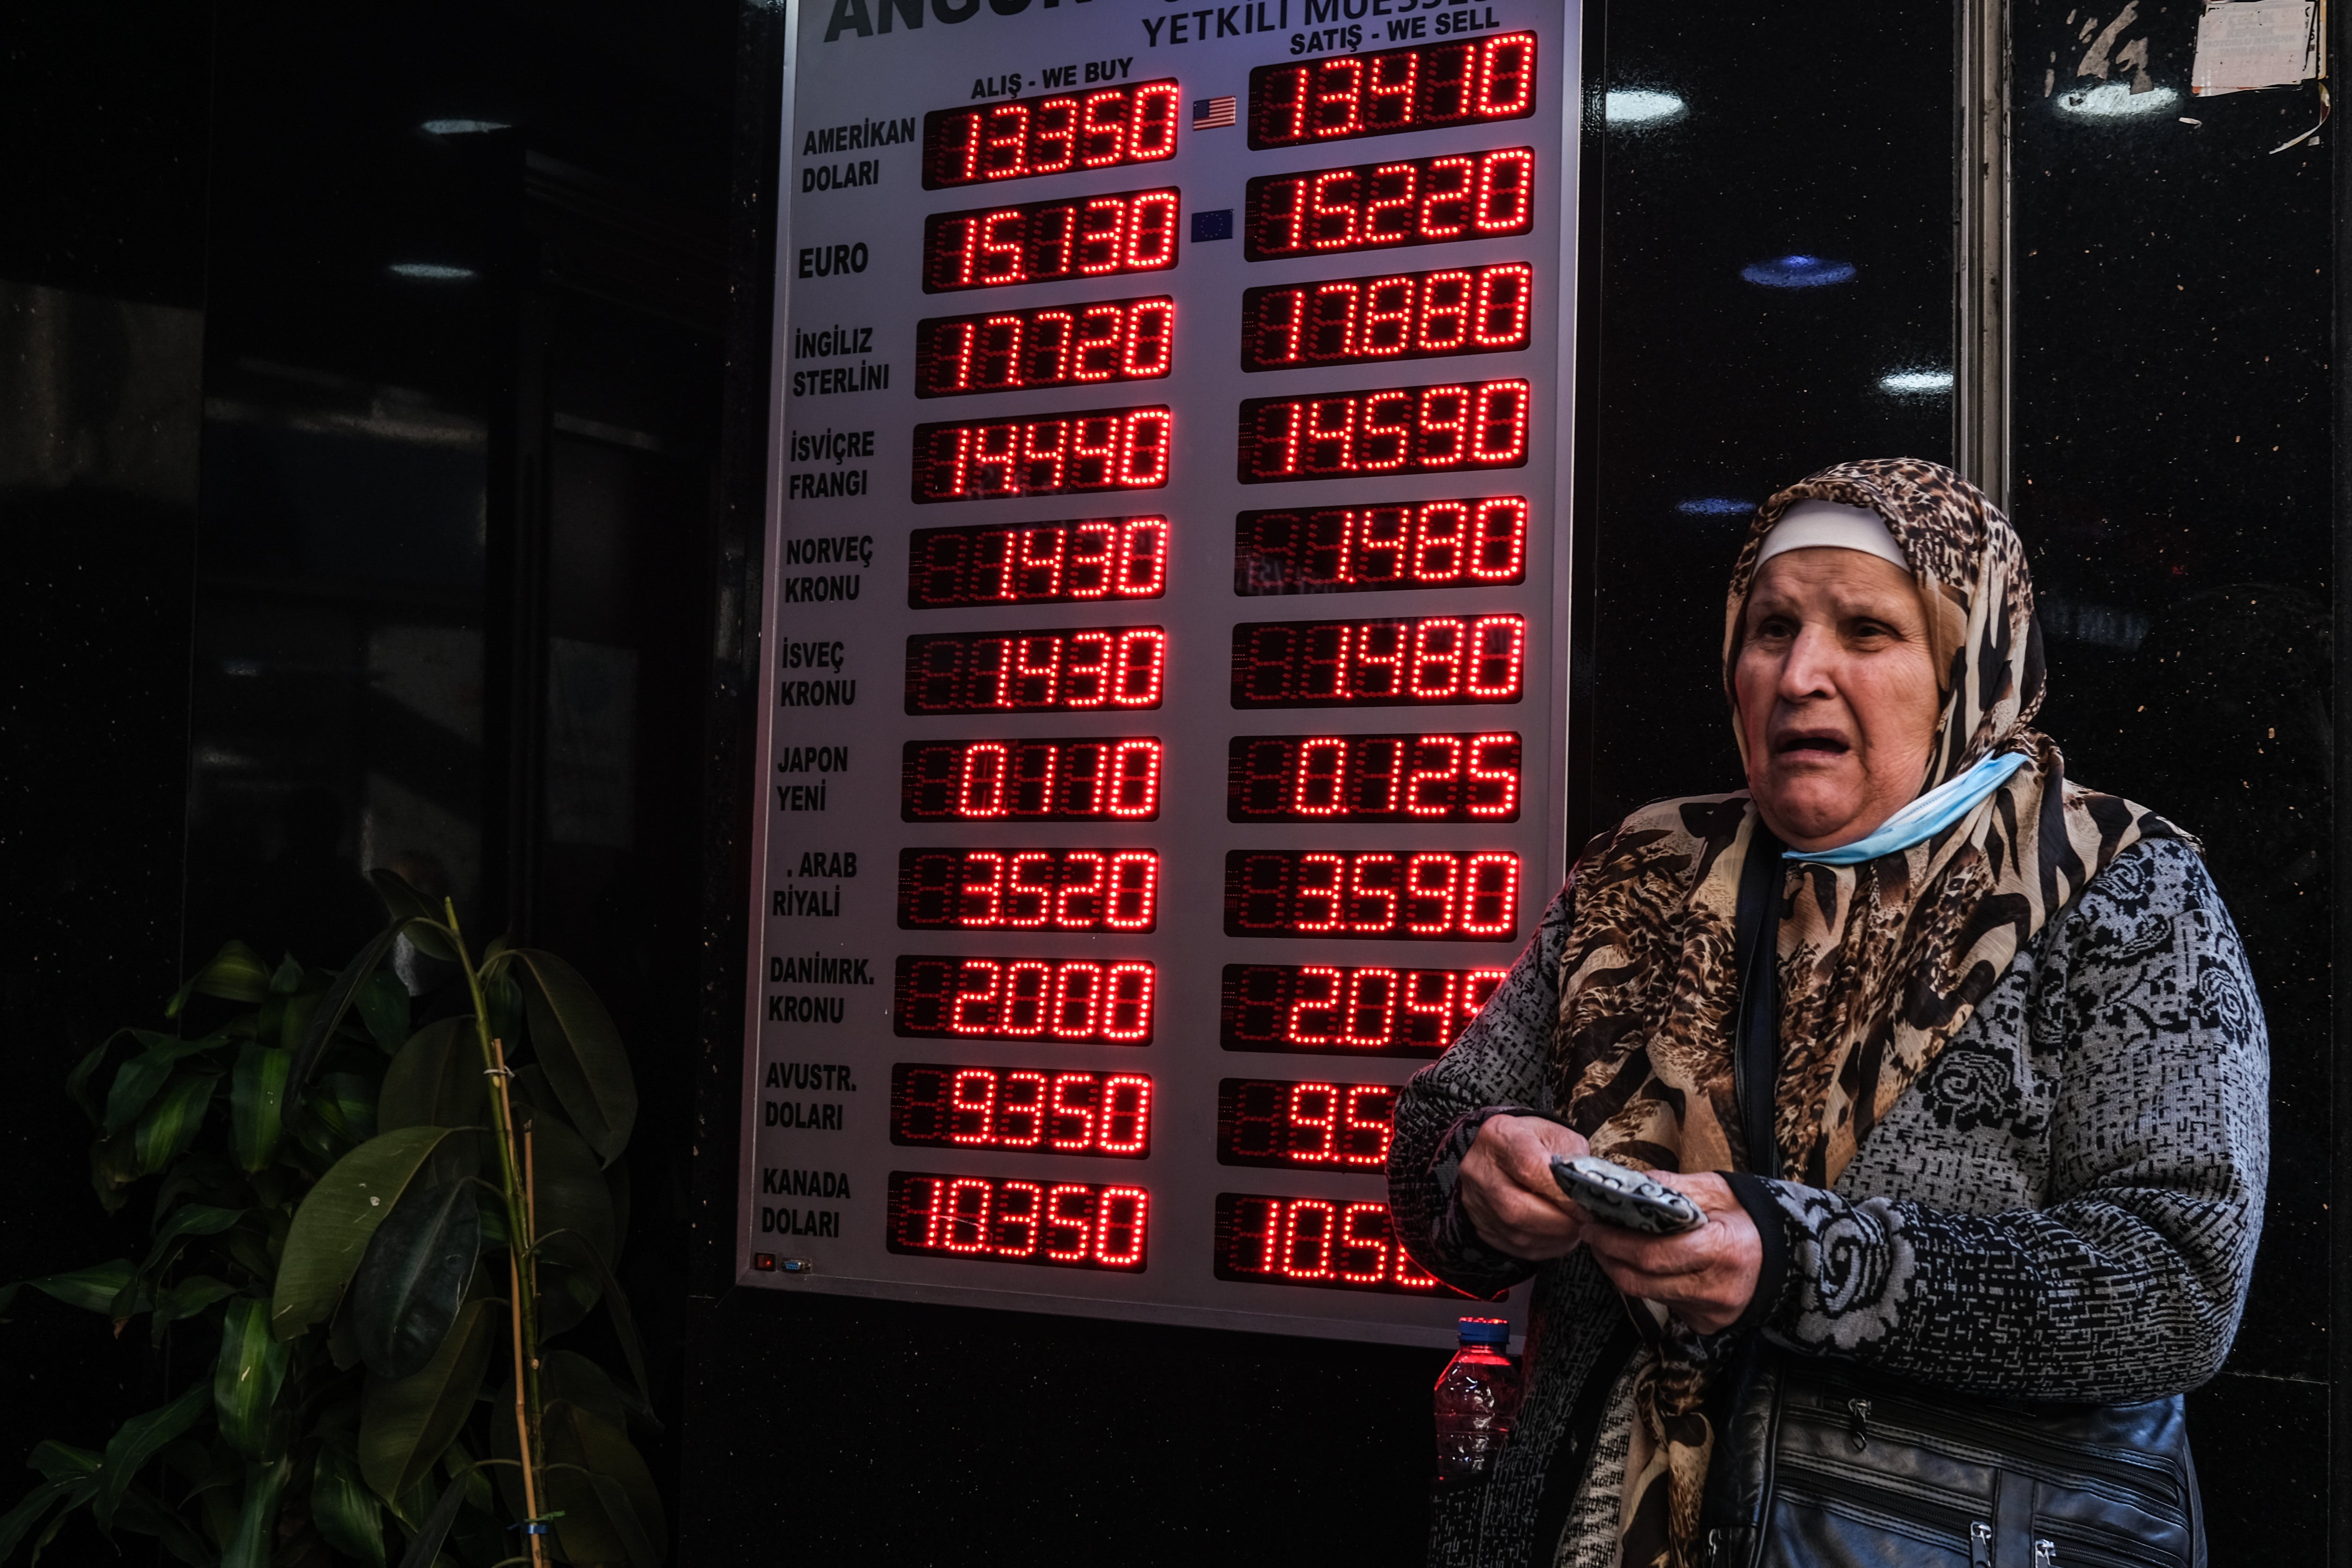 Turkey’s lira has hit an all-time low, dropping 40 per cent in a few weeks